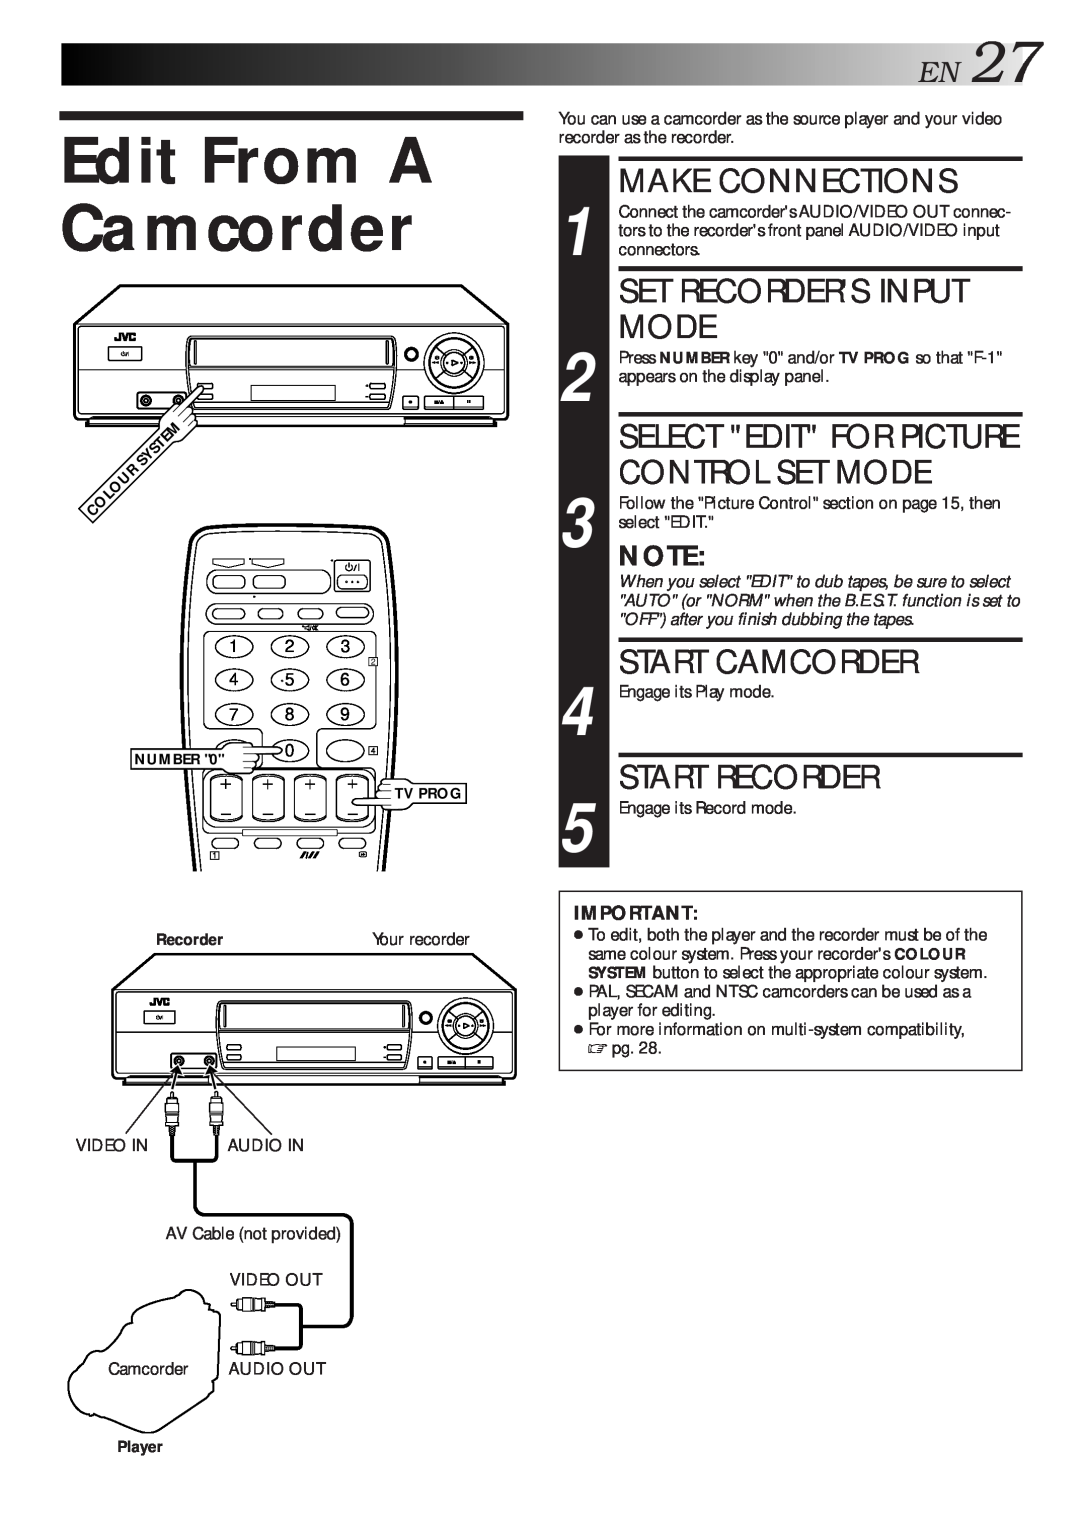 JVC HR-J461MS Edit From A Camcorder, EN27, Set Recorders Input Mode, Select Edit For Picture Control Set Mode 